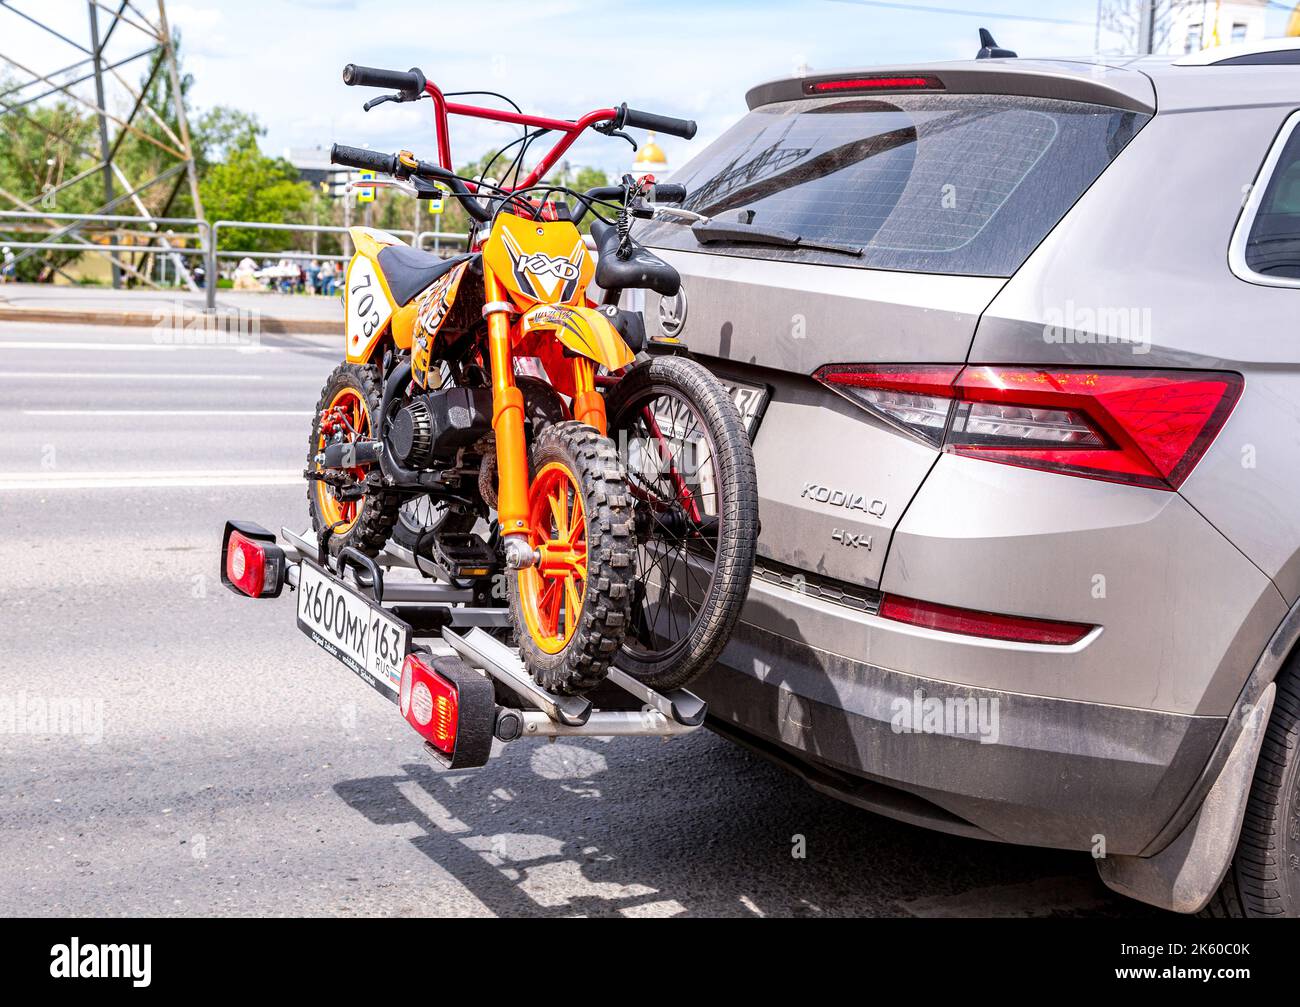 Samara, Russia - June 05, 2022: Bicycles are carried on the rear bumper of the car. Bikes are strapped to the back of the vehicle. Leisure trip in the Stock Photo